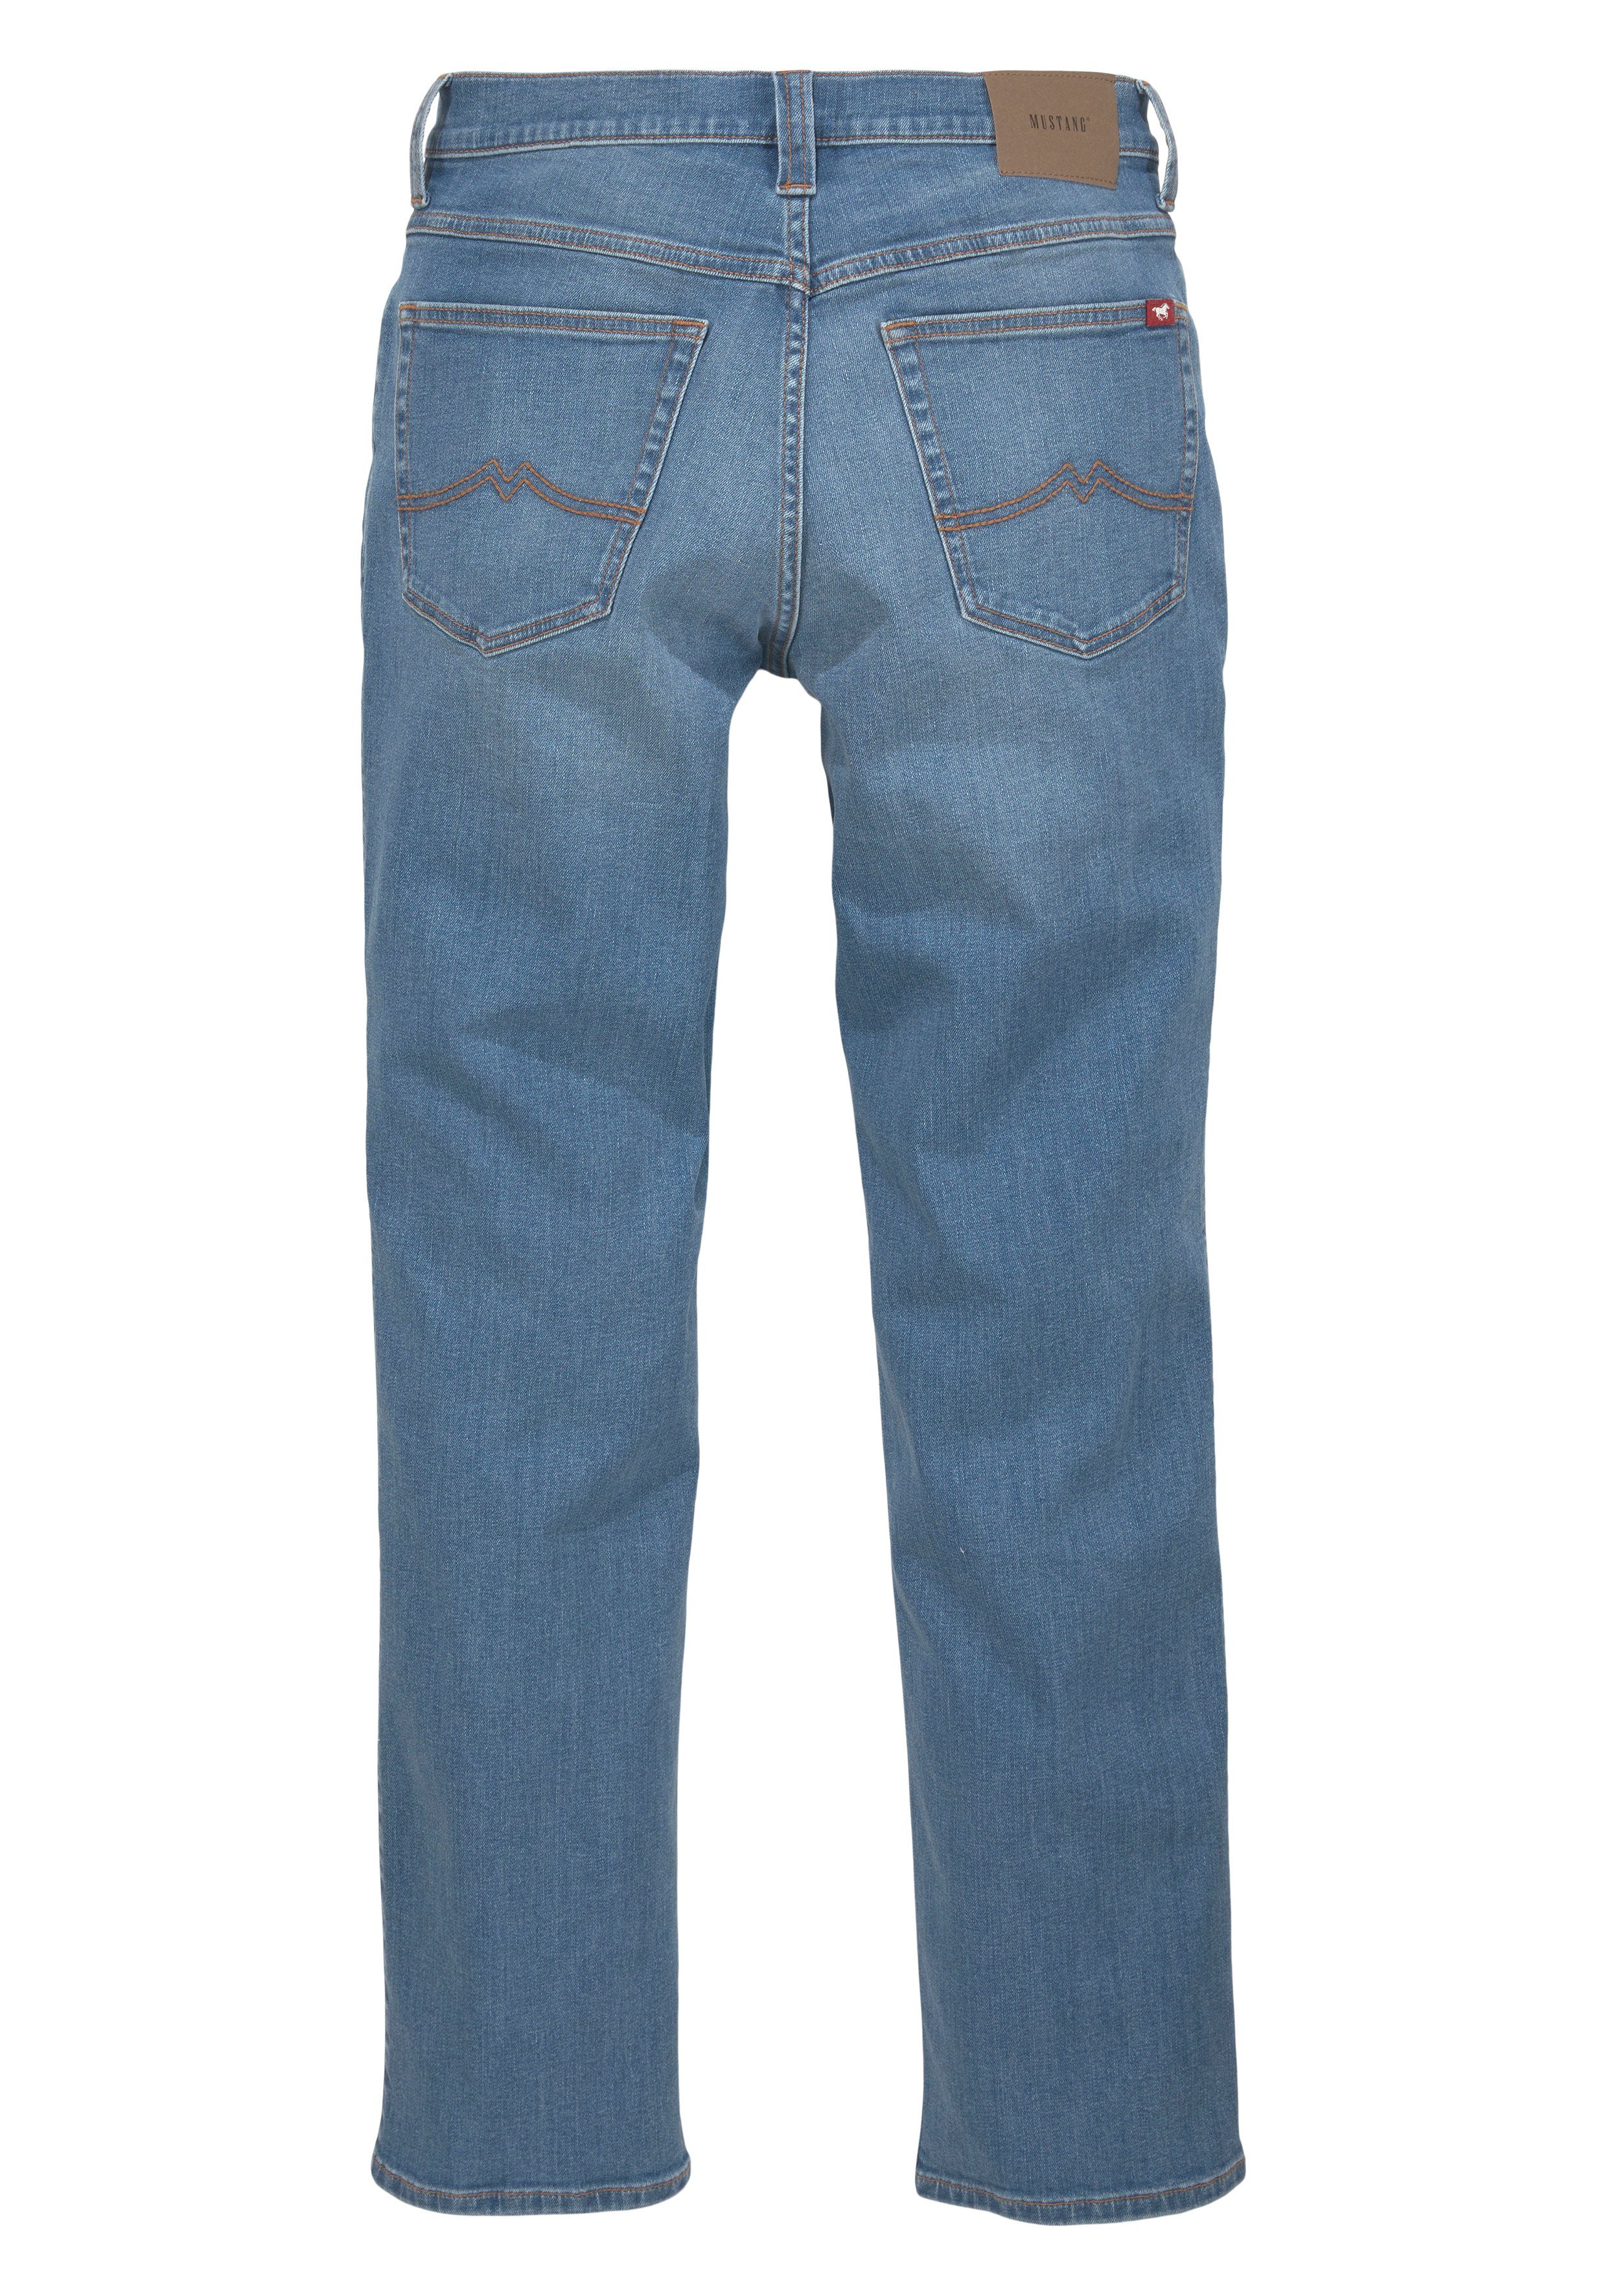 Style medium 5-Pocket-Jeans washed MUSTANG blue Tramper Straight